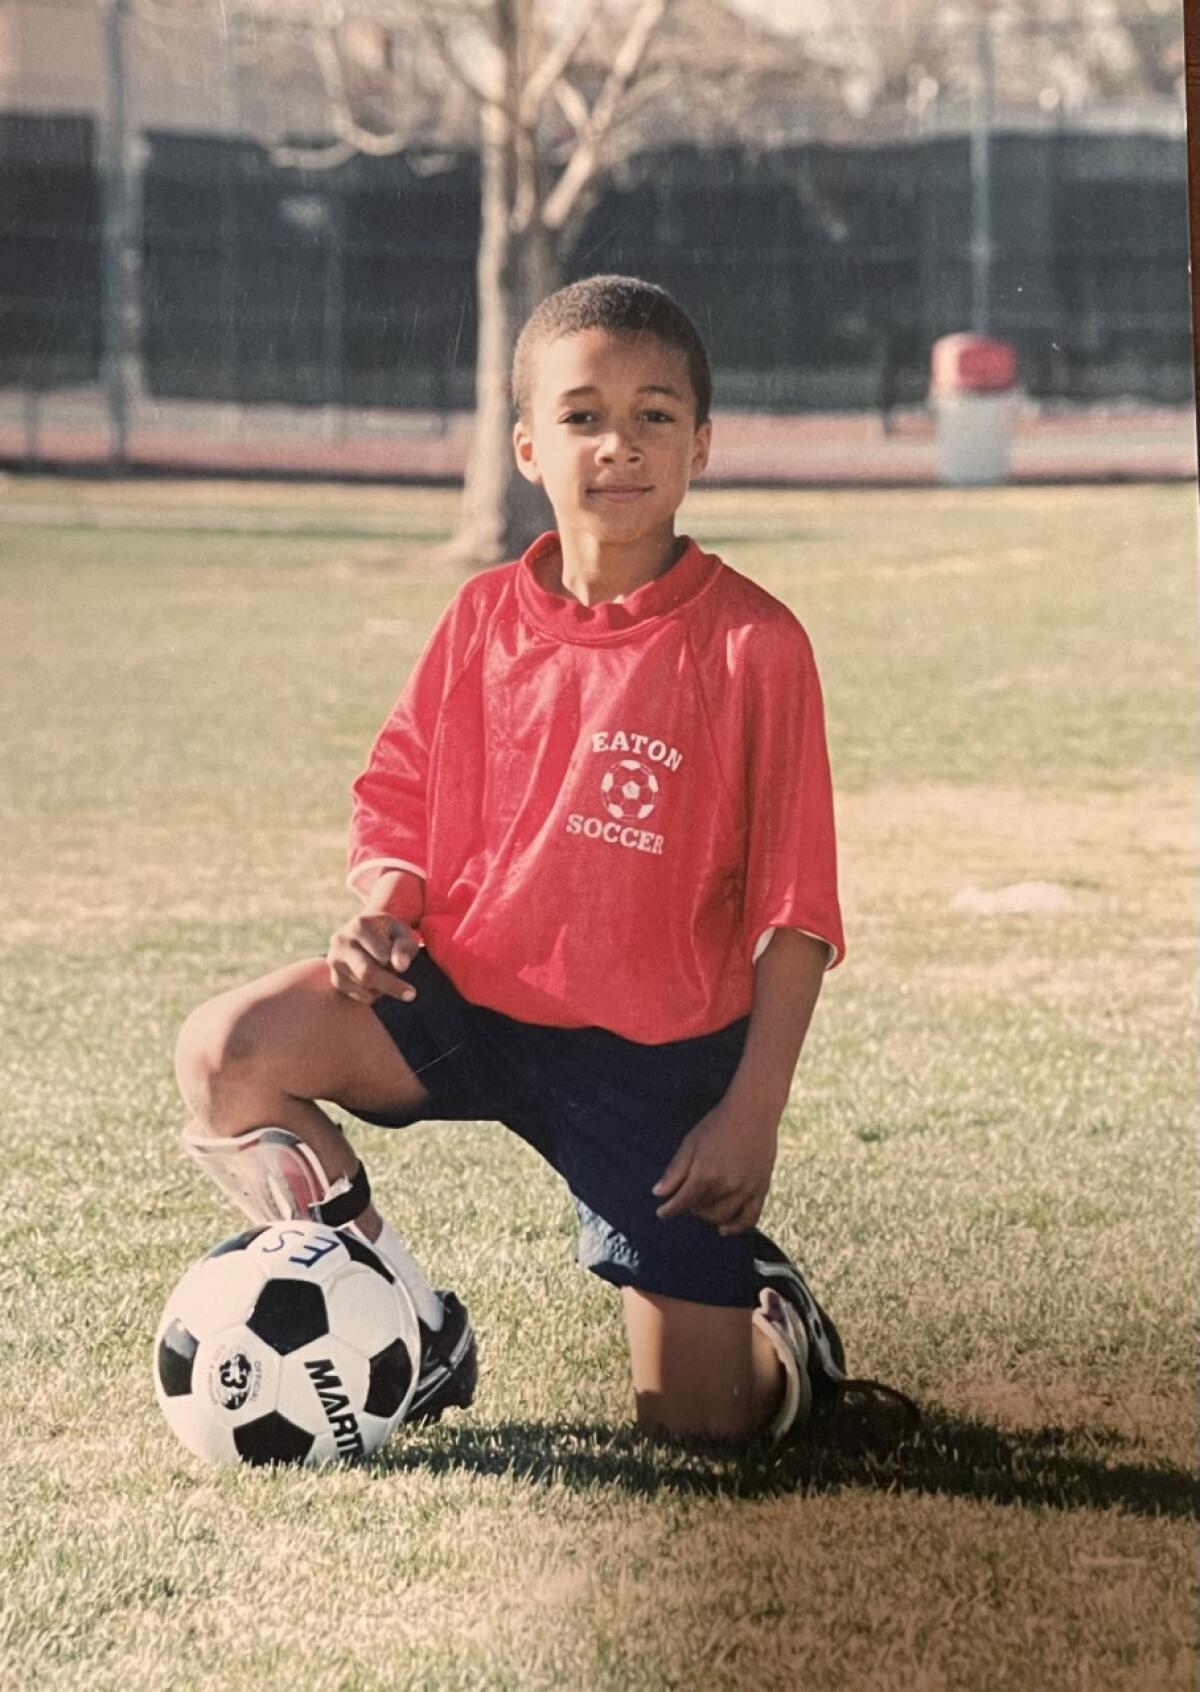 Austin Ekeler, 6, played soccer as a child in Eaton, Colo., about an hour outside Denver.